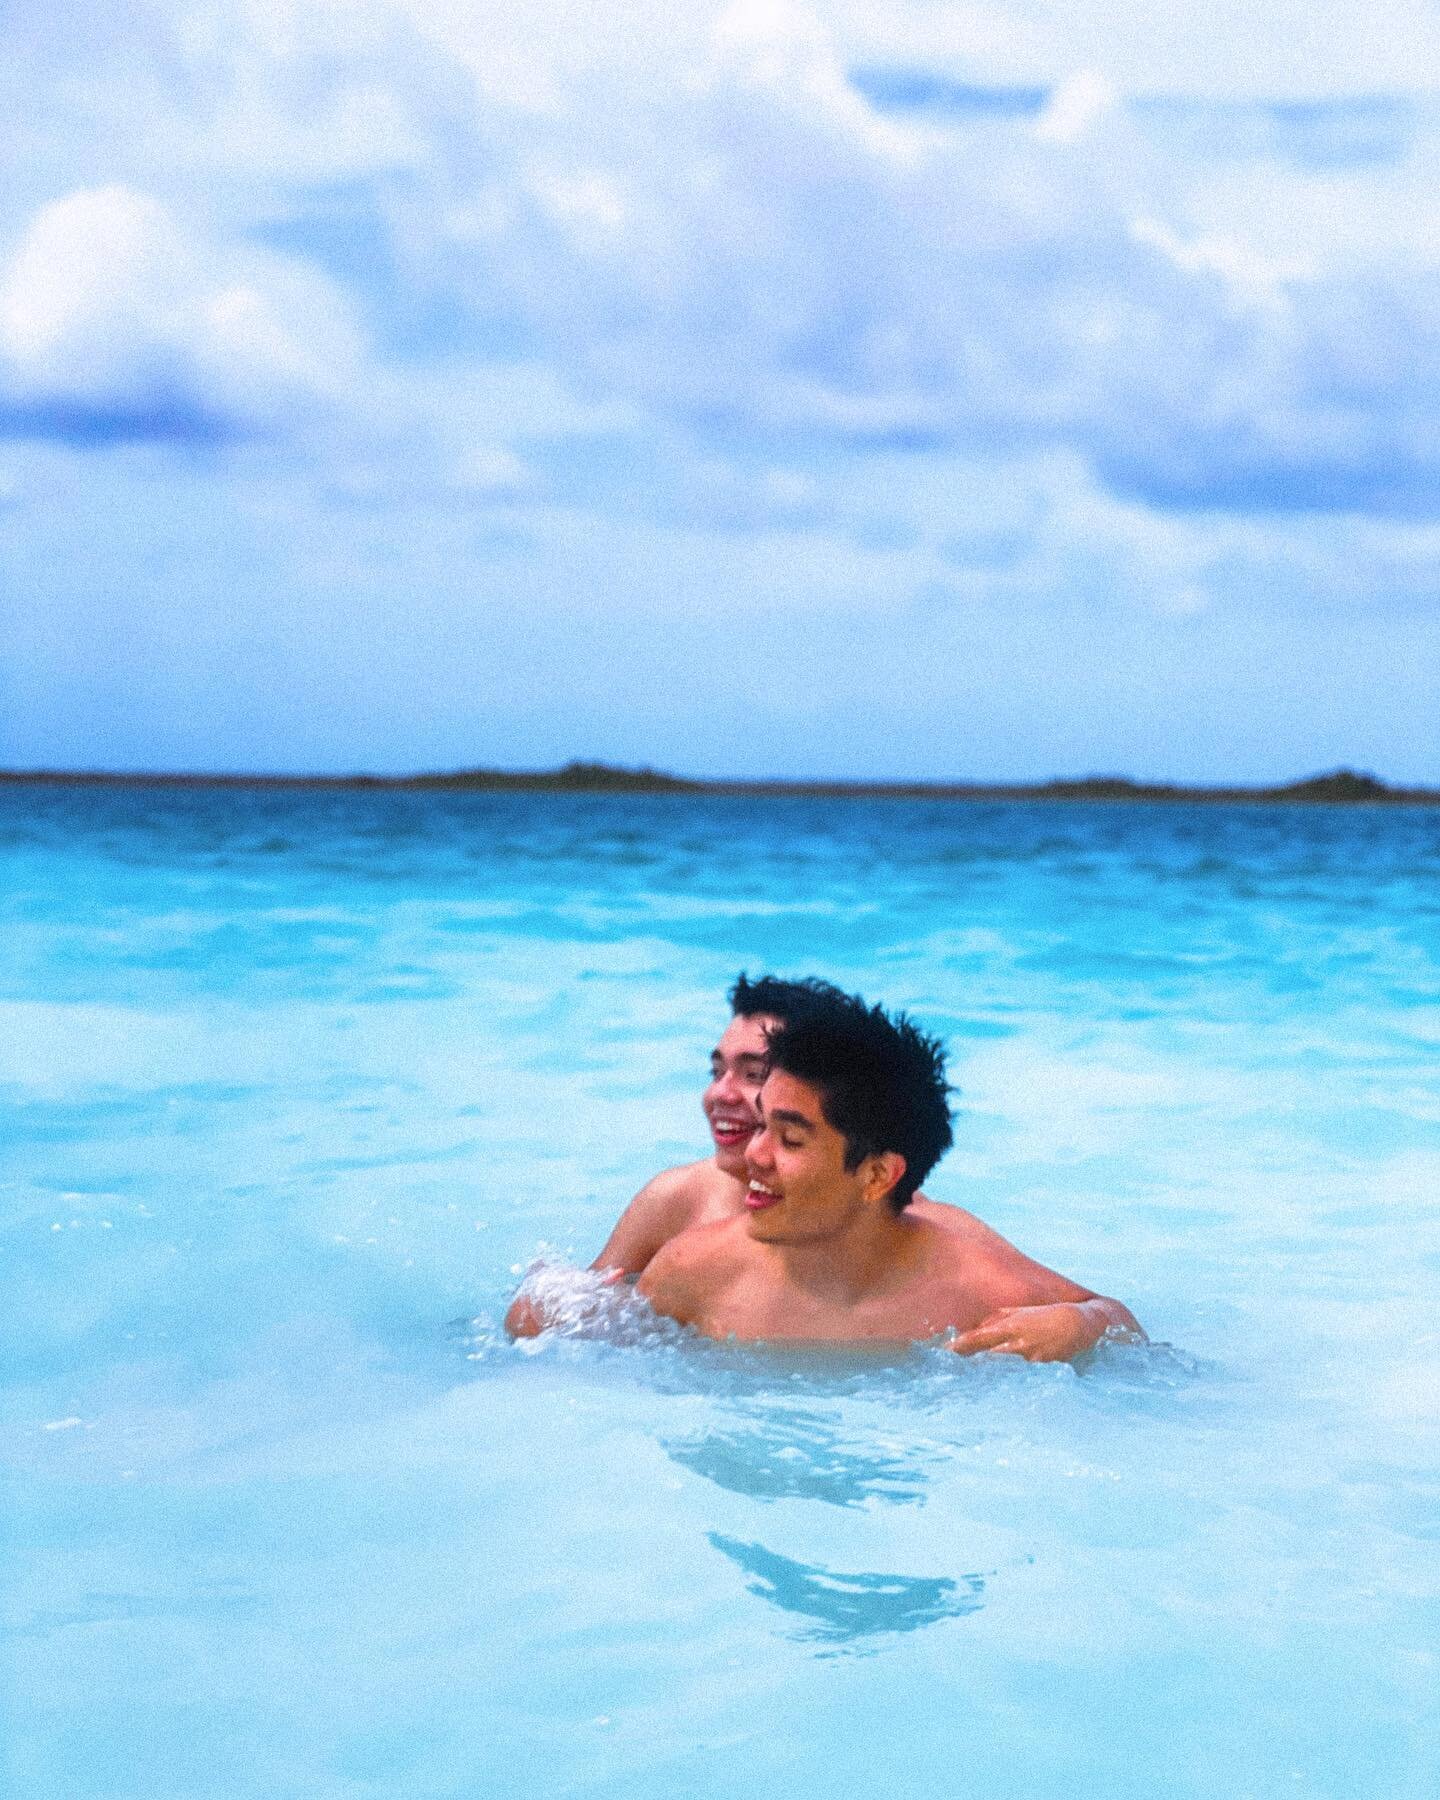 miguel&rsquo;s 20 years old and he still doesn&rsquo;t know how to swim lmao 🤣🏊